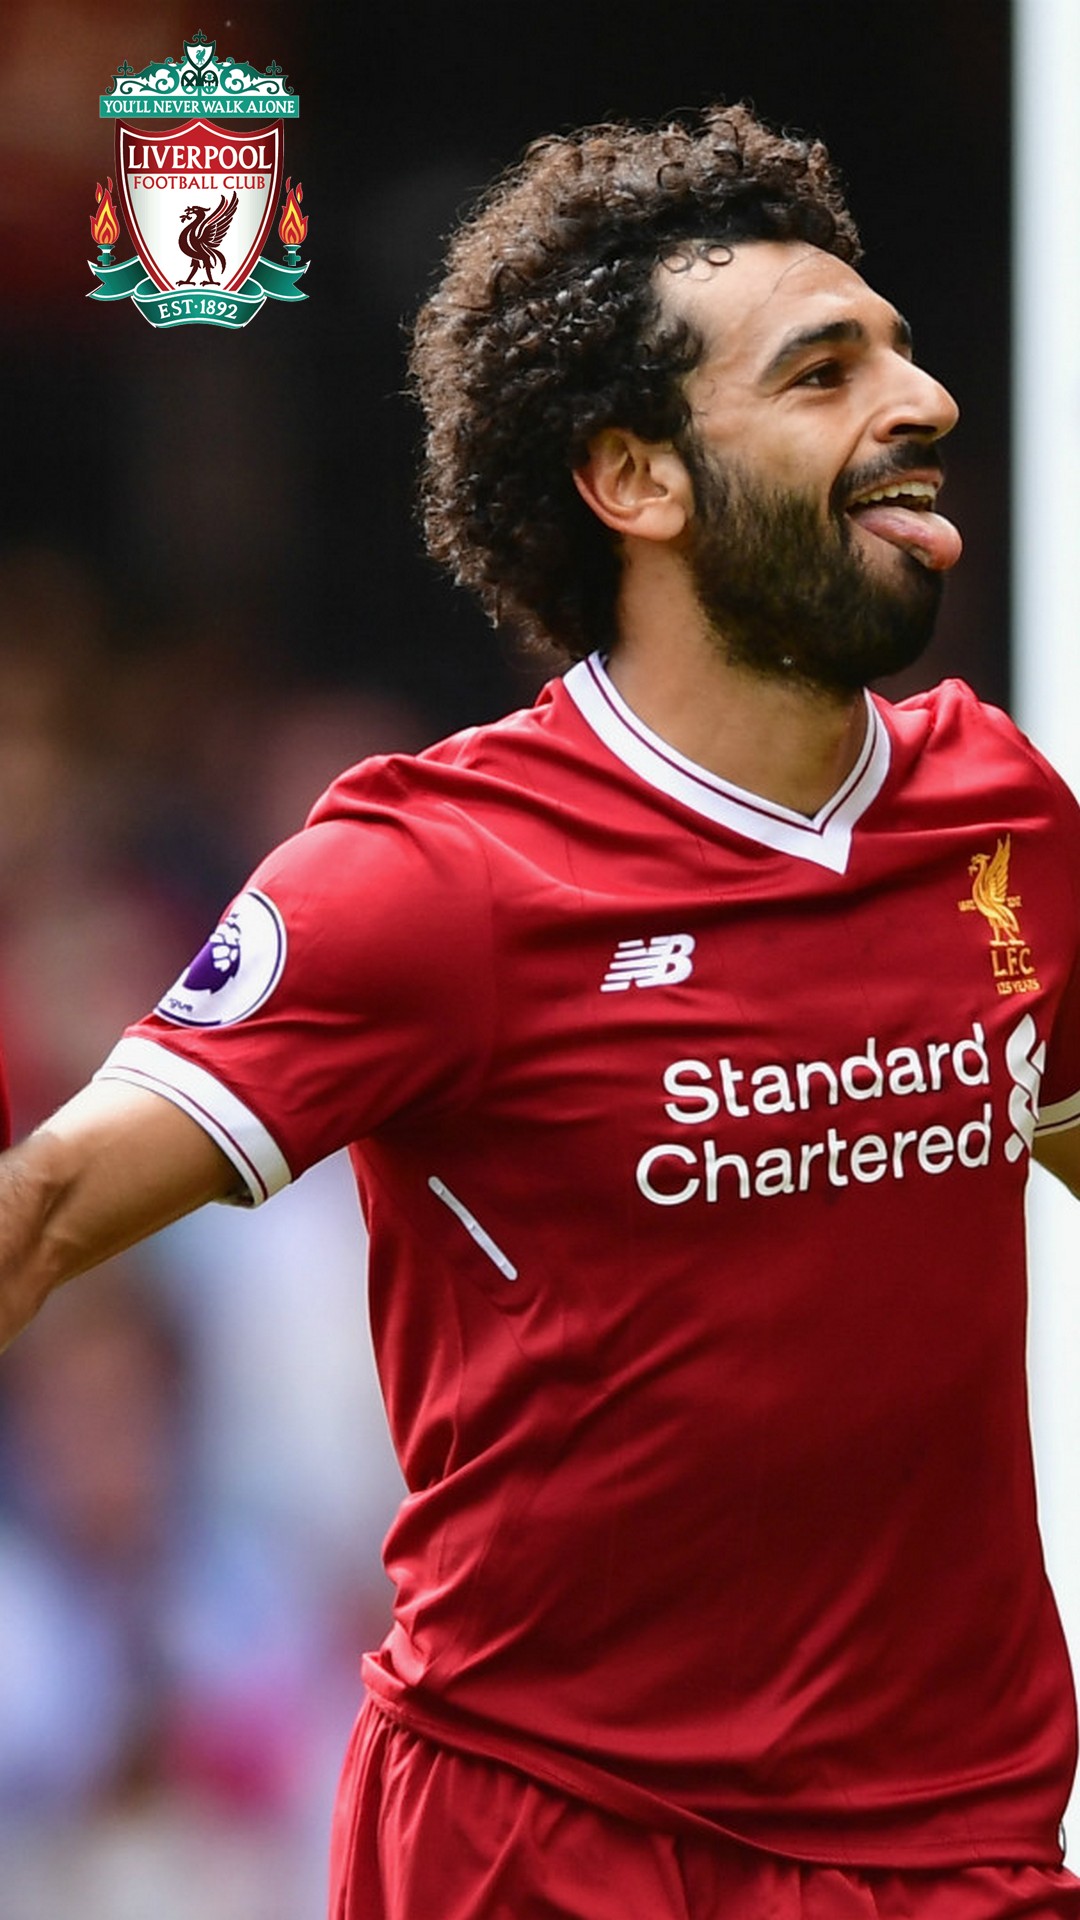 Mohamed Salah Liverpool Wallpaper Android with image resolution 1080x1920 pixel. You can make this wallpaper for your Android backgrounds, Tablet, Smartphones Screensavers and Mobile Phone Lock Screen